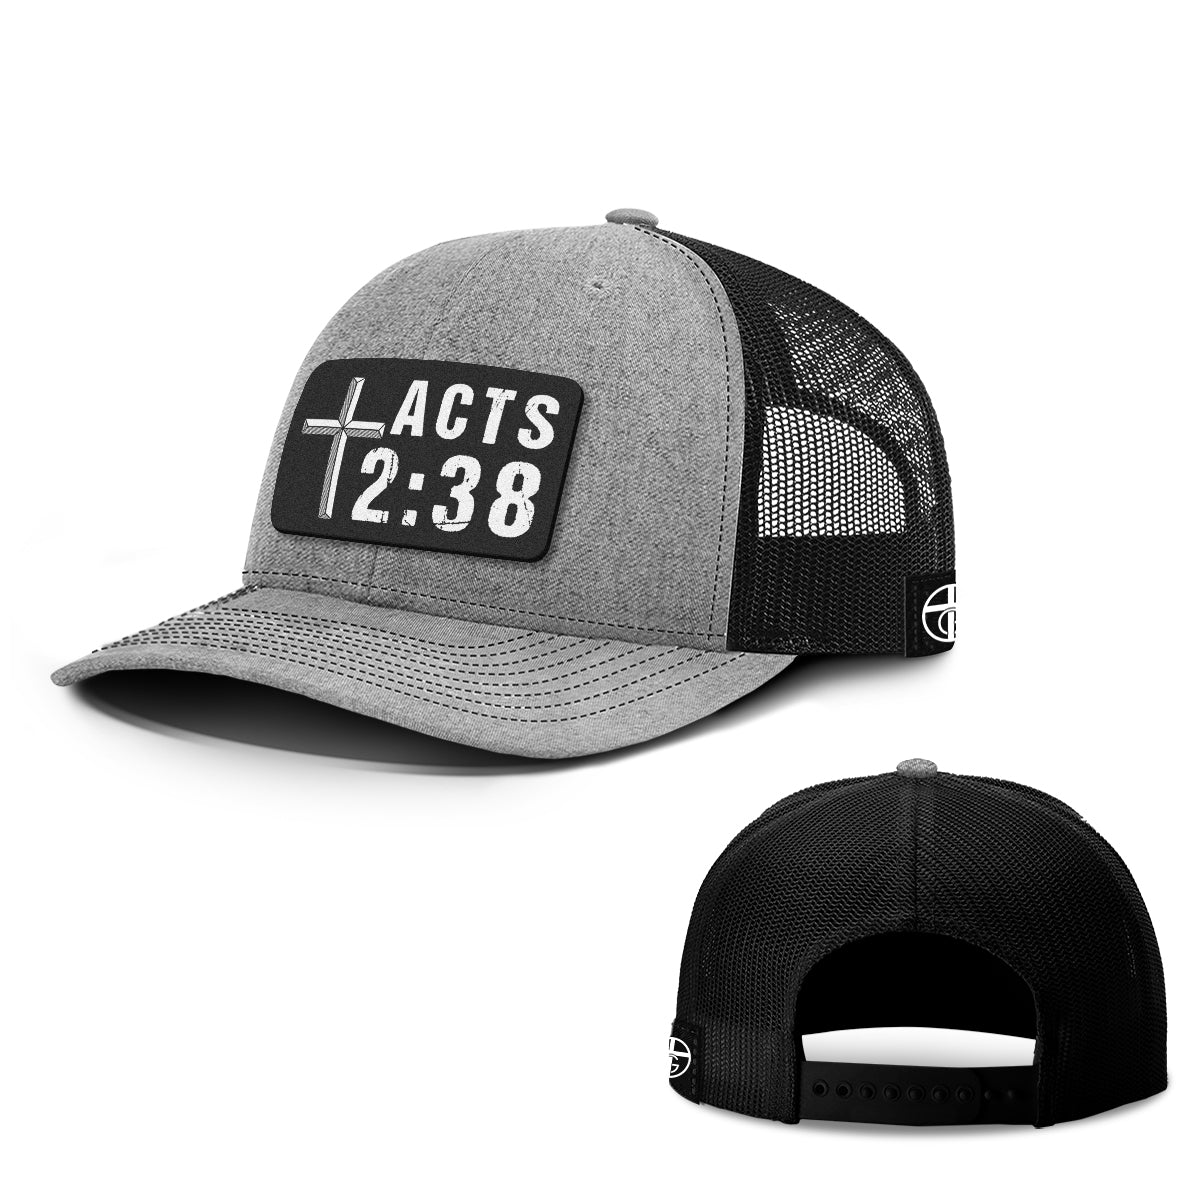 ACTS 2:38 Patch Hats